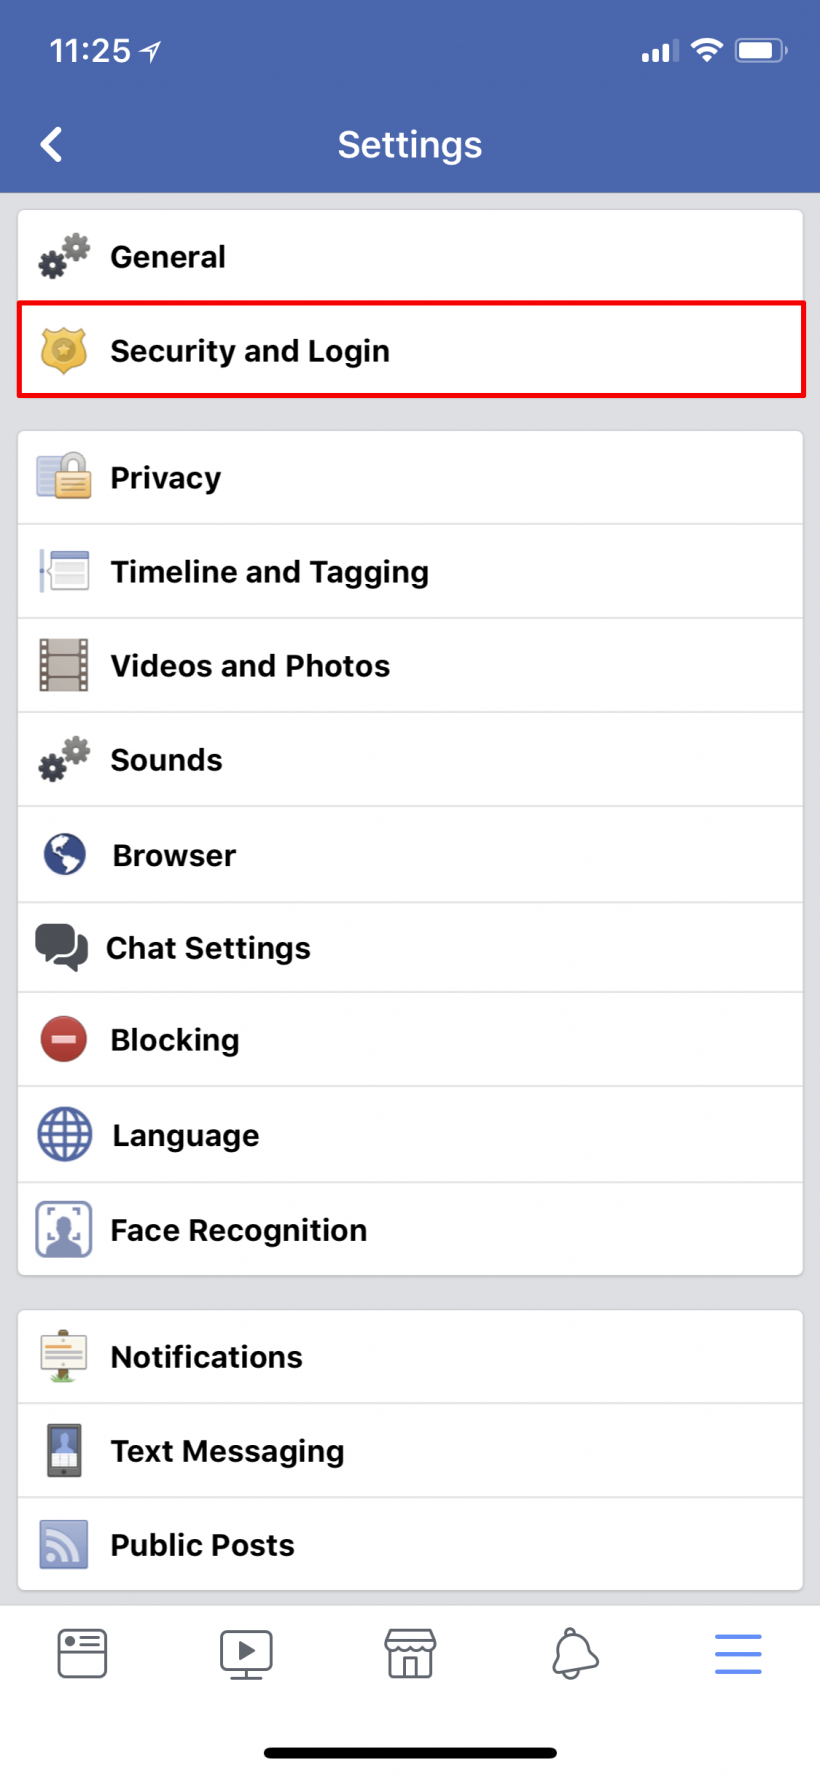 How to turn on 2FA two-factor authentication on Facebook on iPhone and iPad.